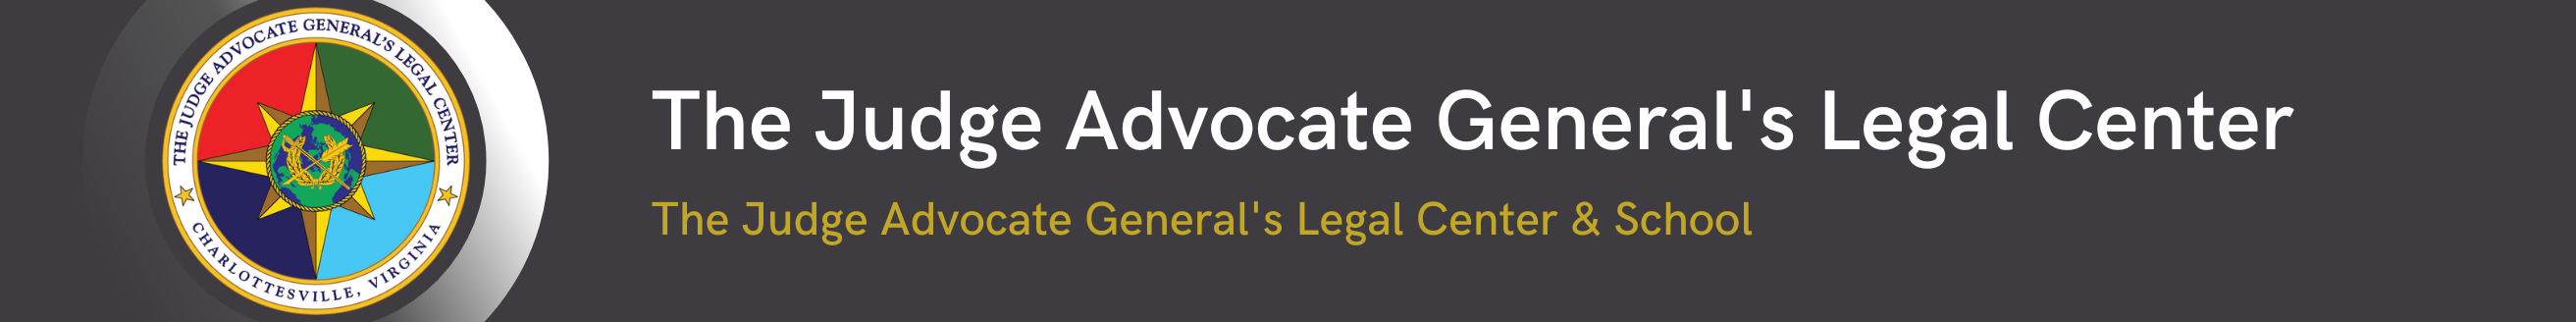 The Judge Advocate General's Legal Center Banner